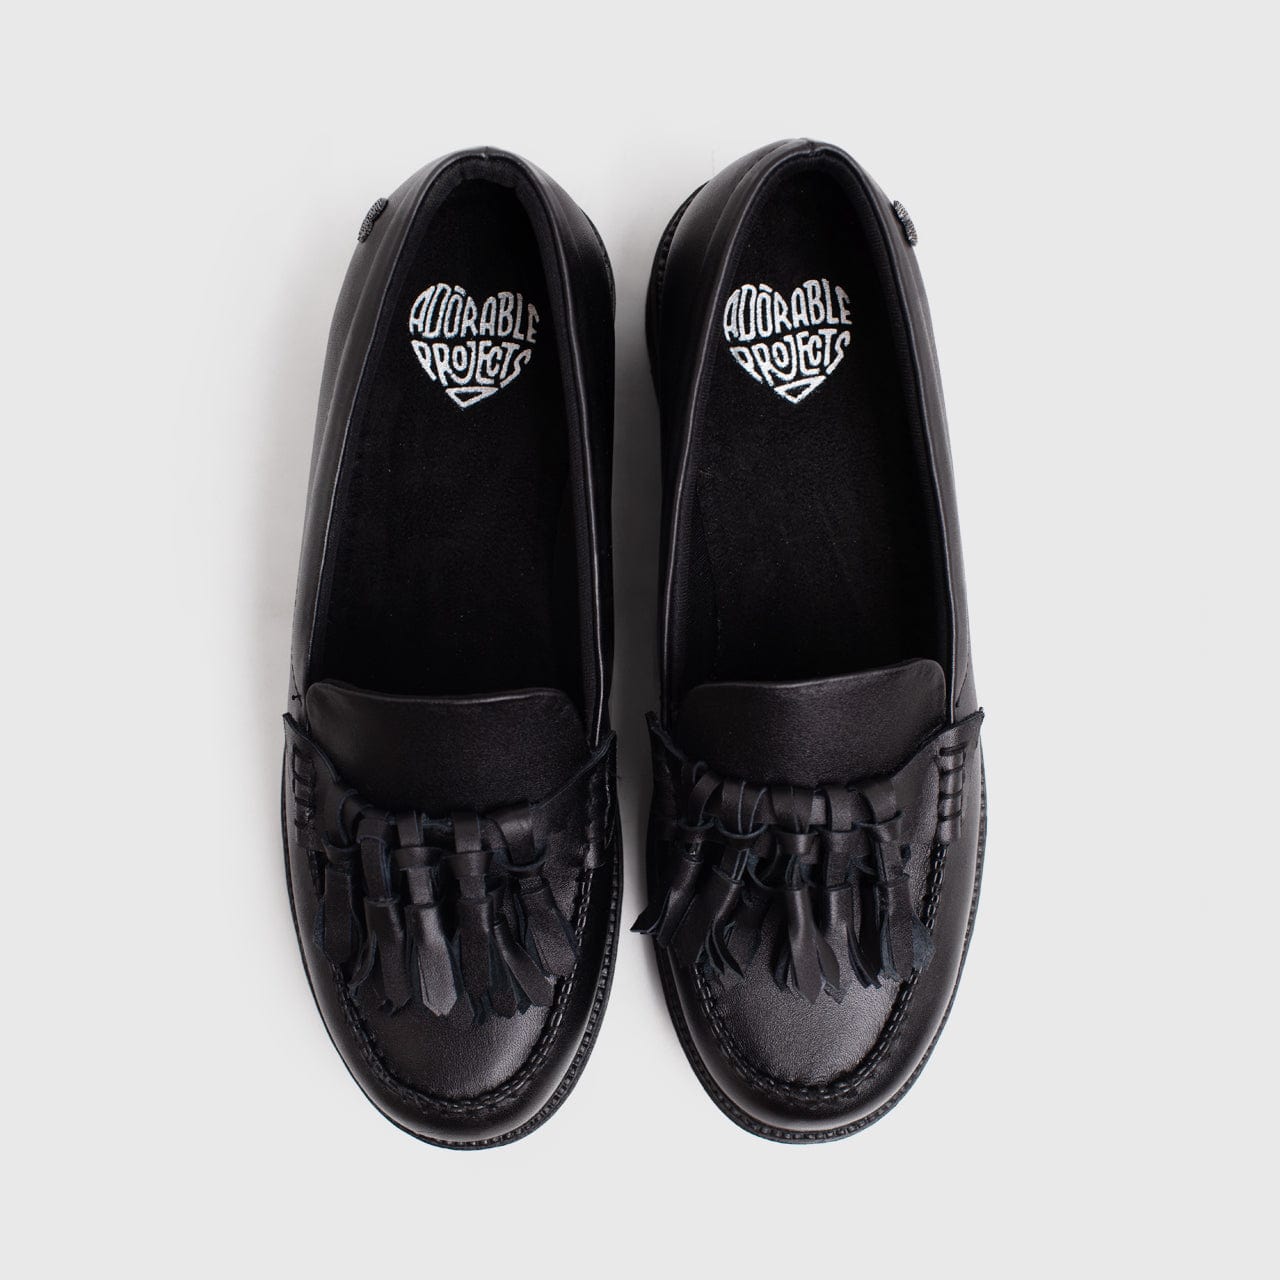 Adorable Projects Official Adorableprojects - Yadira Loafer Genuine Leather Black